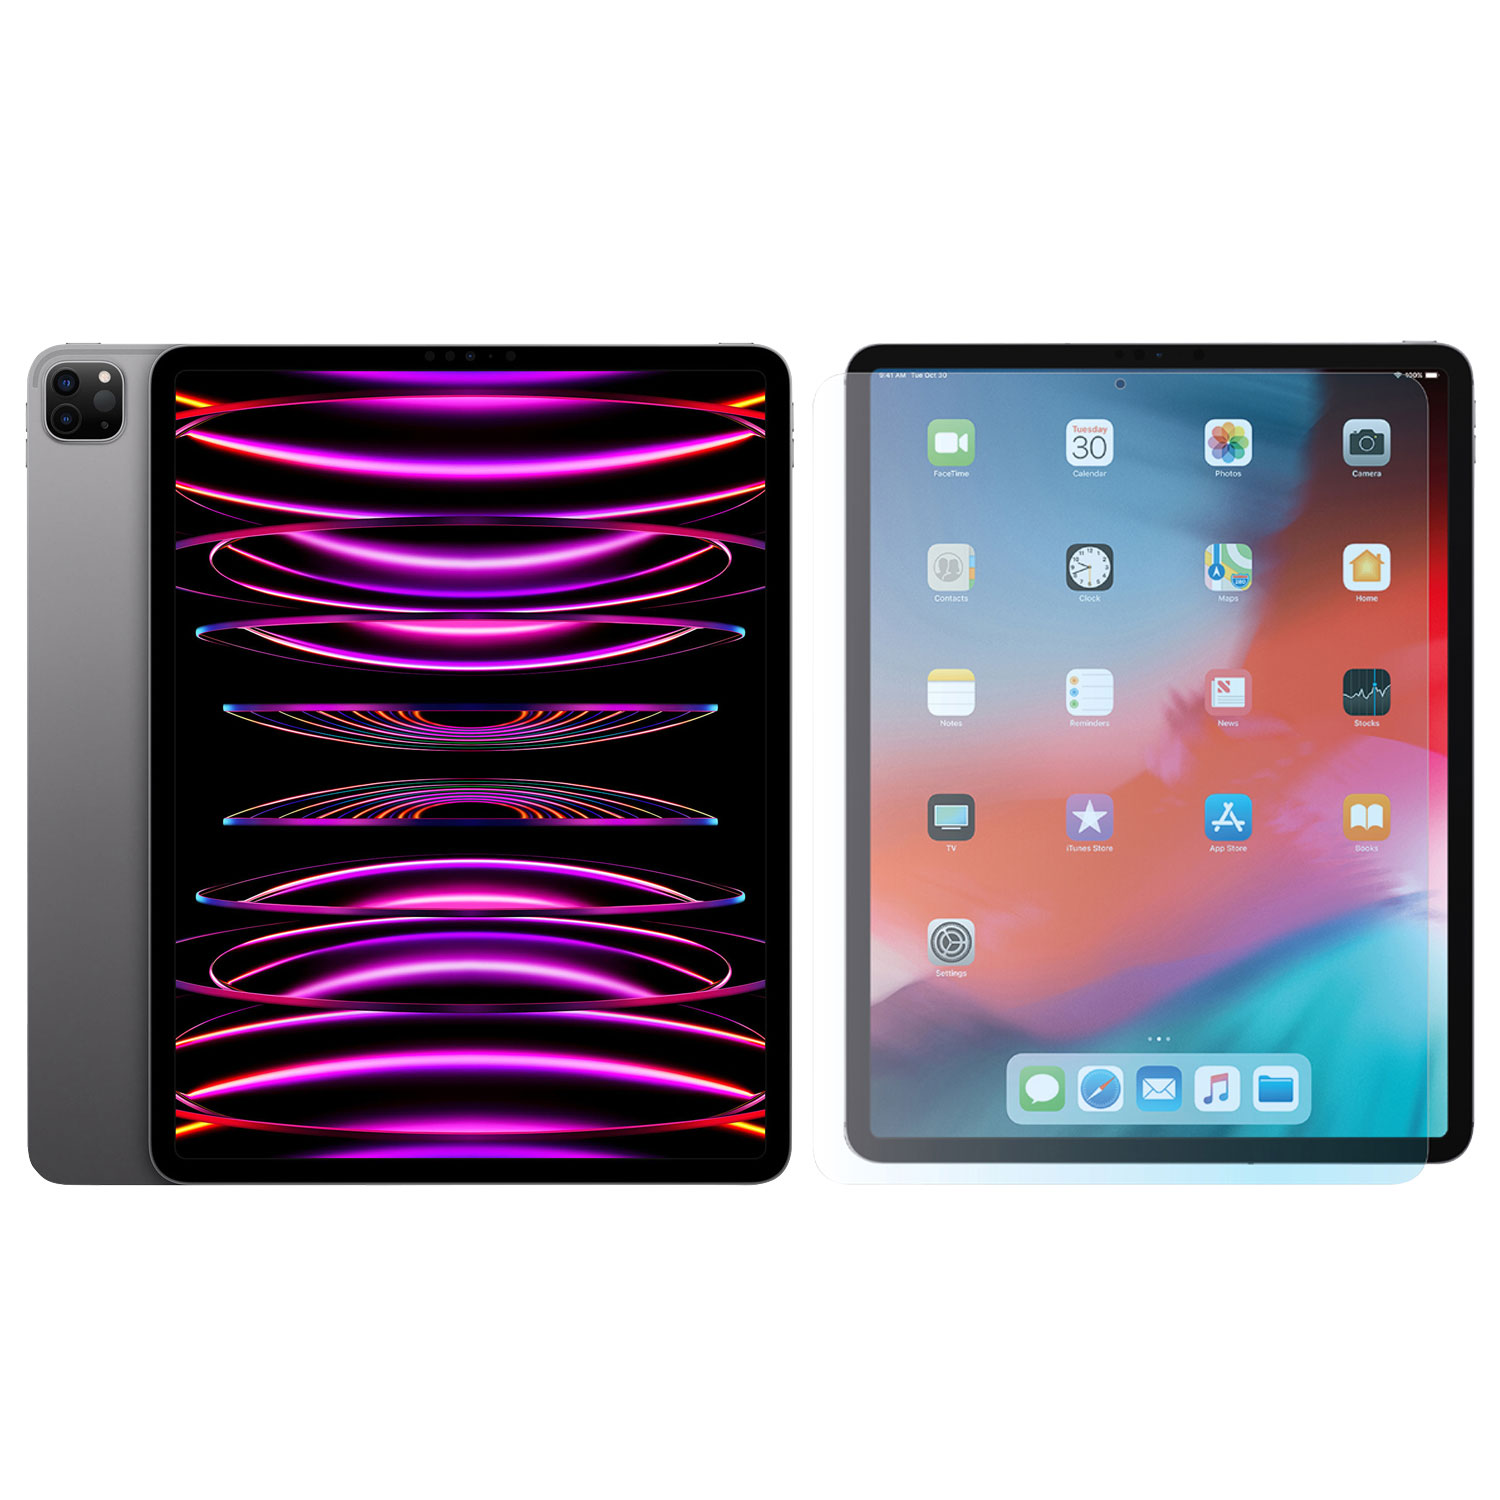 Apple iPad Pro 12.9" 128GB Wi-Fi (6th Generation) with Milano Glass Screen Protector - Space Grey